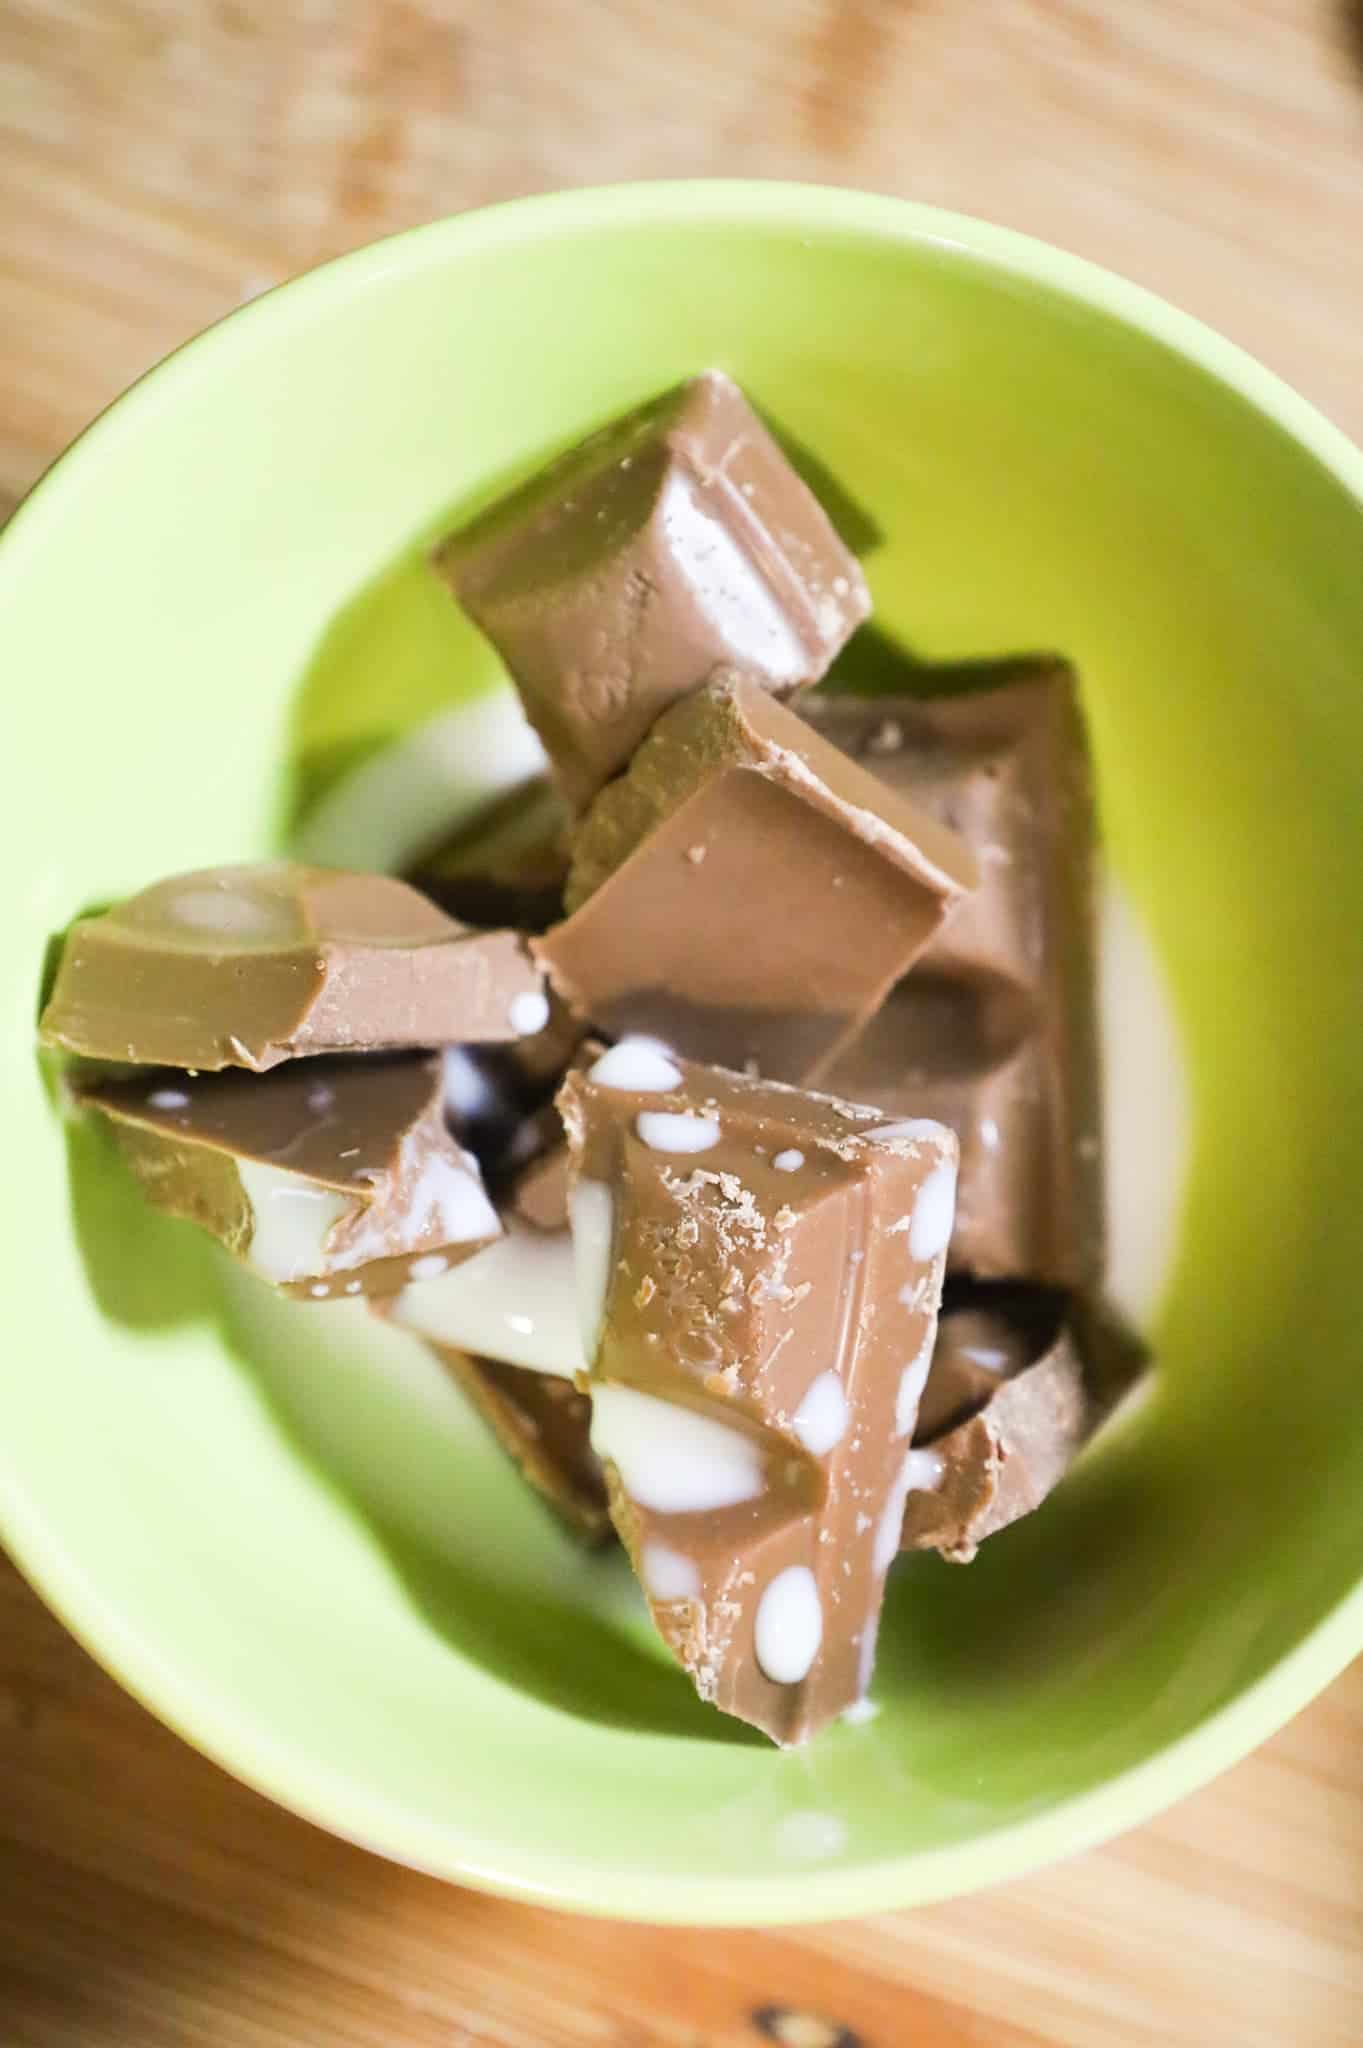 milk chocolate squares and milk in a small bowl